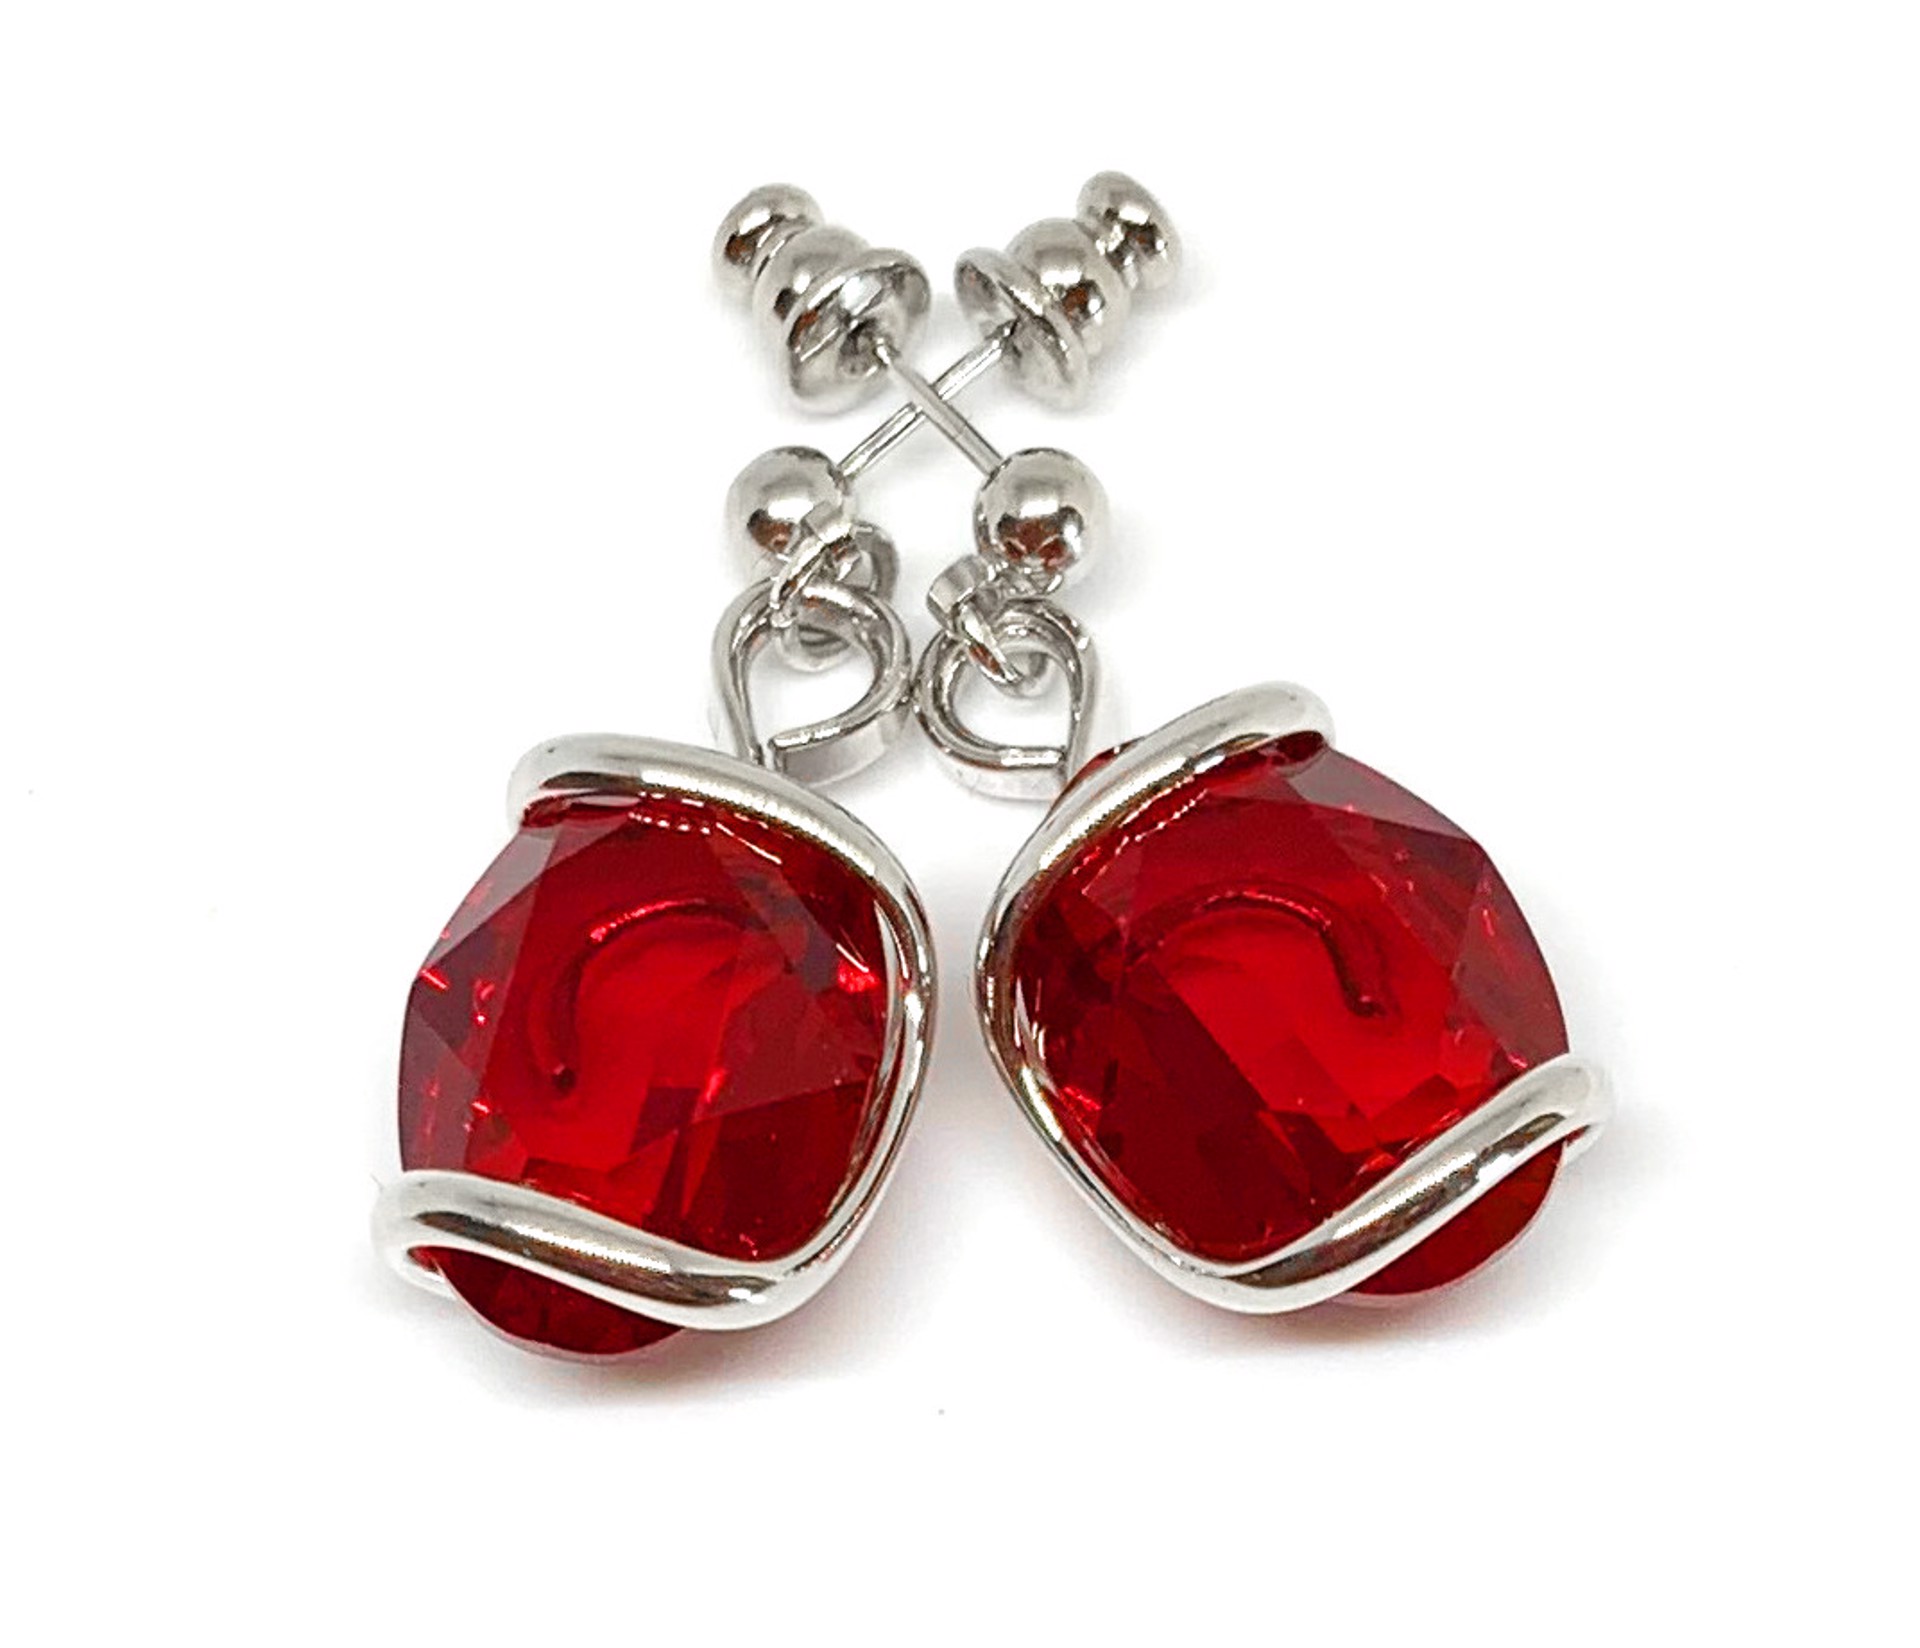   Ruby Red Oval Swarovski Crystal Dangle Earrings - Triple Rhodium Plated by Monique Touber